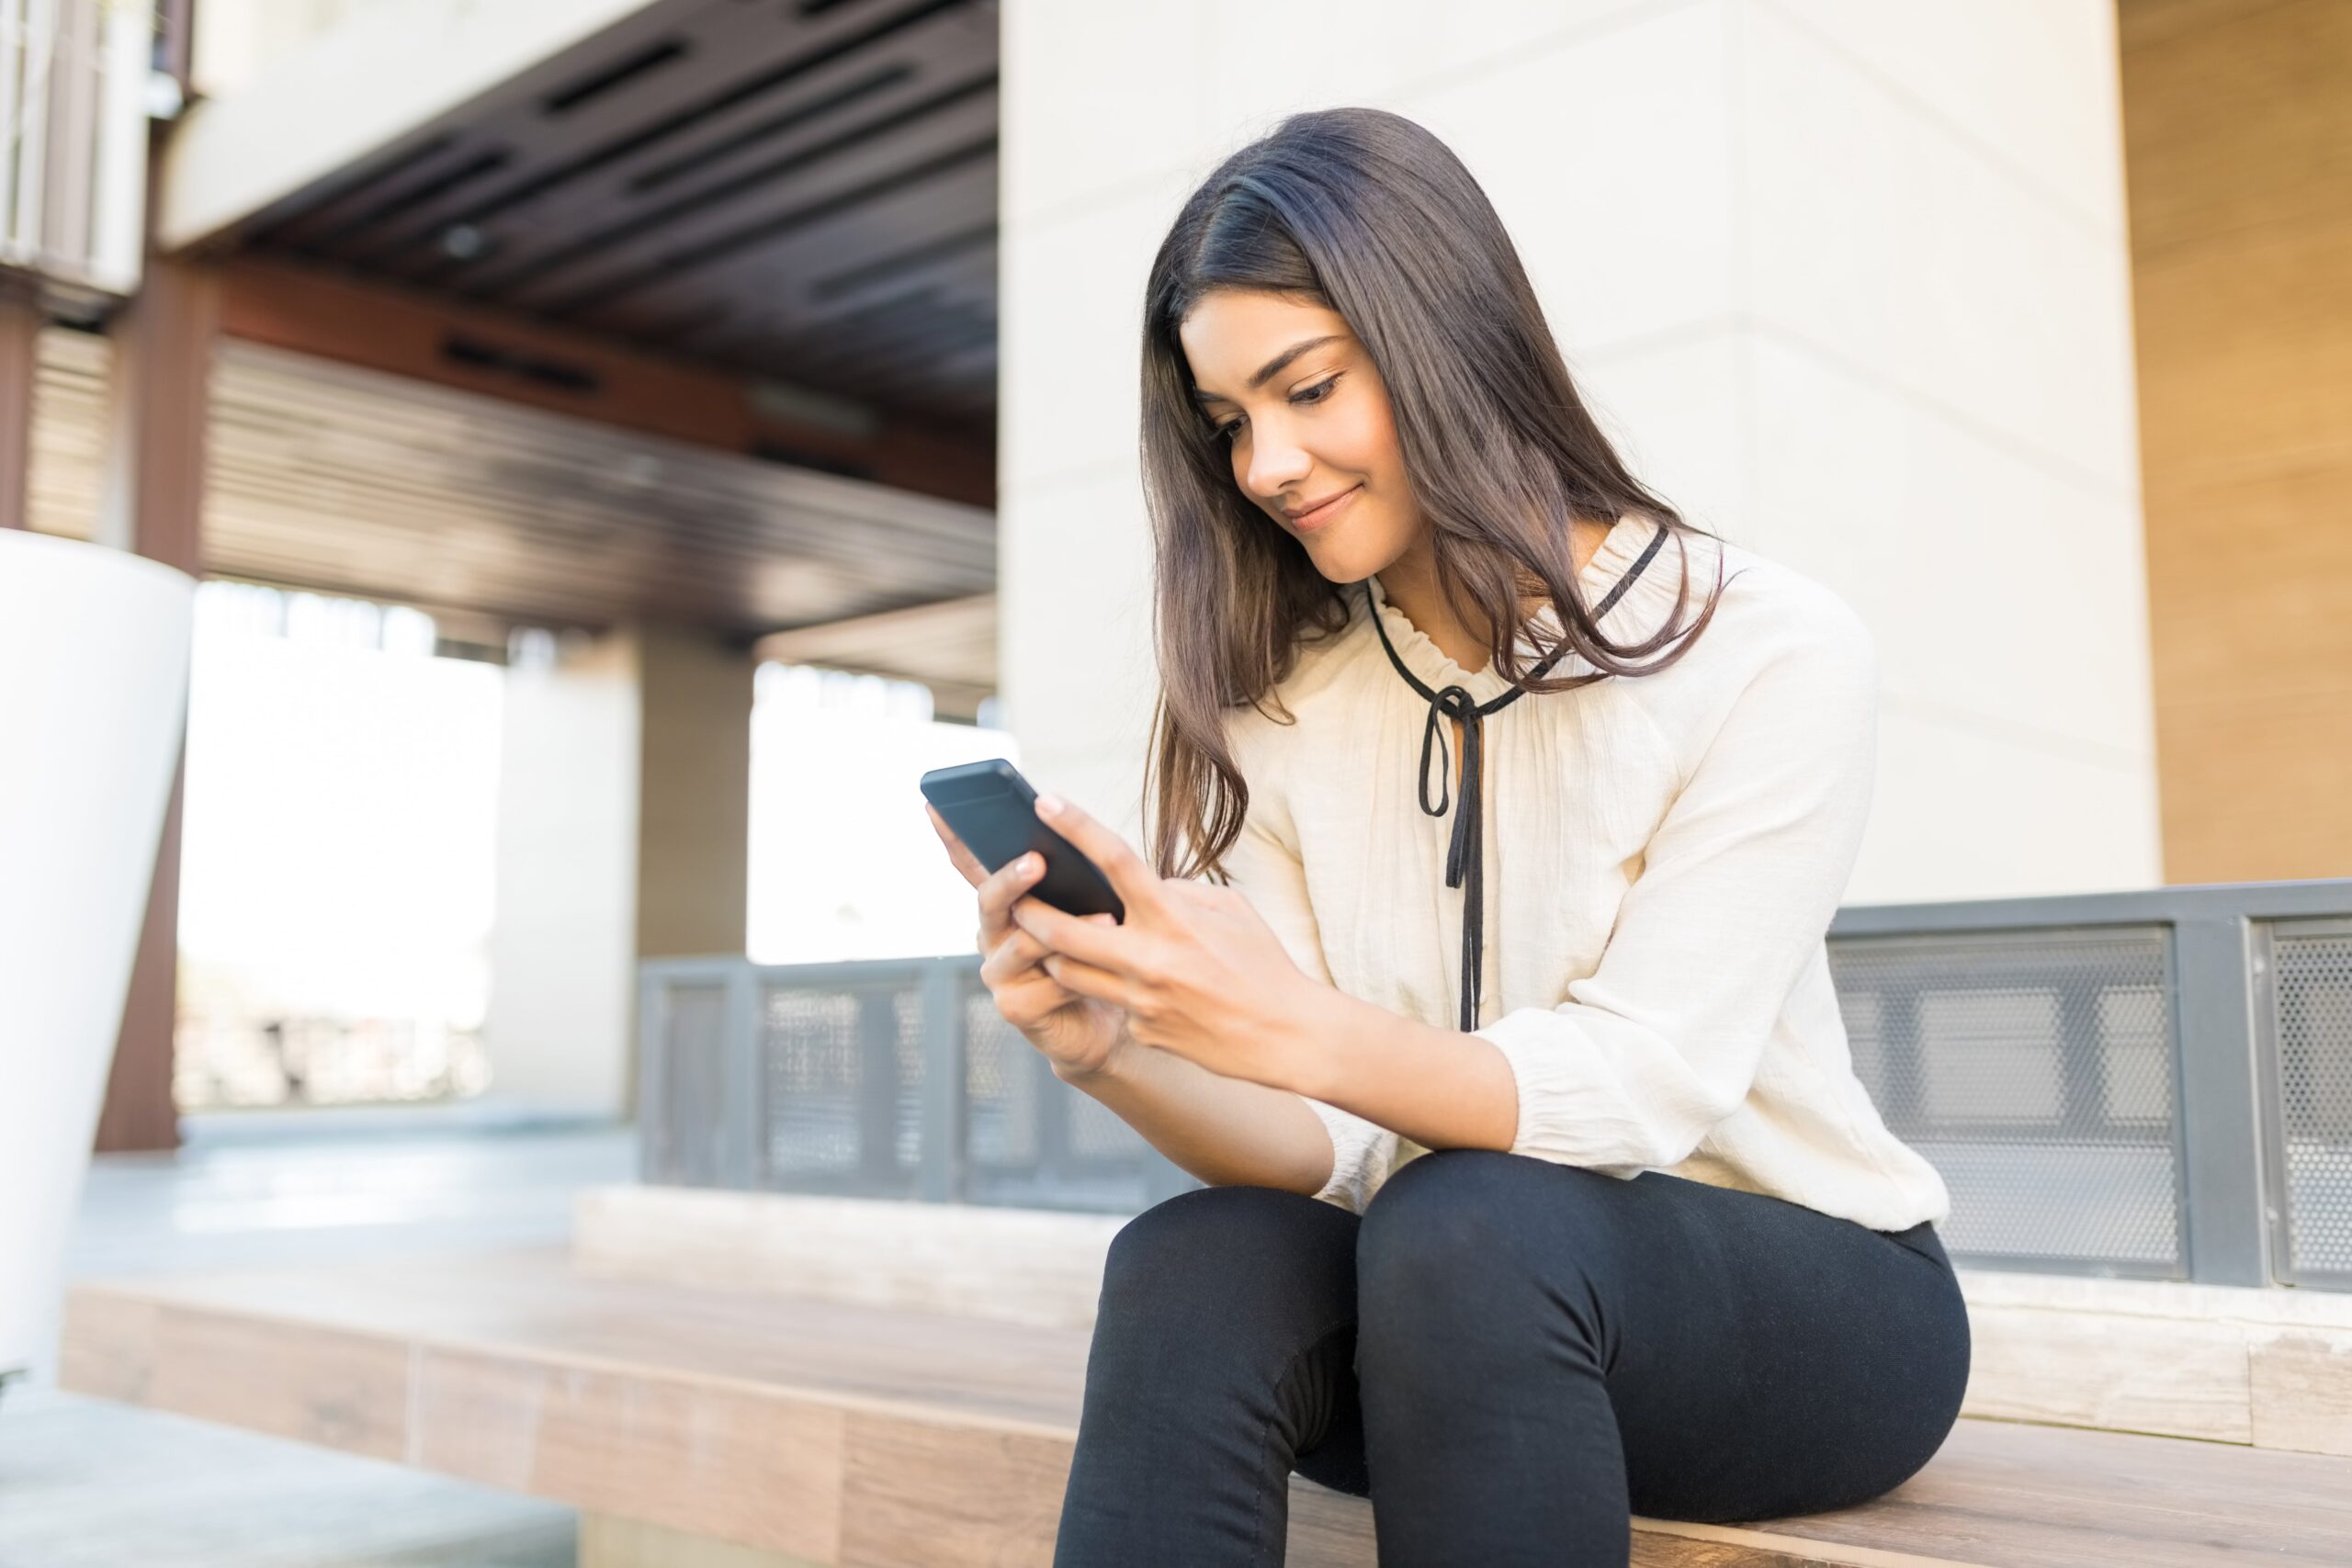 Young woman sitting on office building bench looking at her mobile phone.